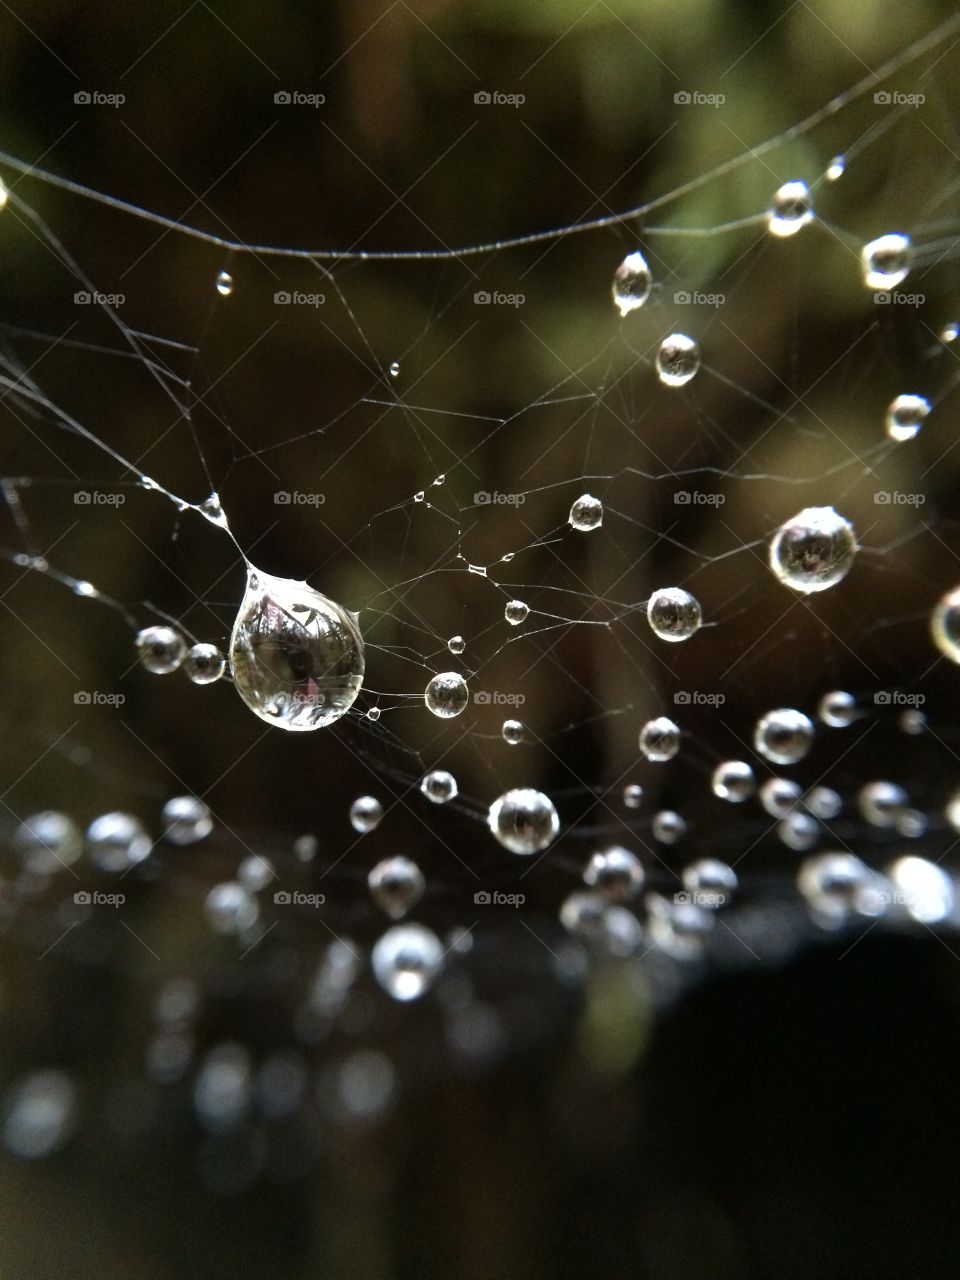 Macro shot of water droplets taken with an iPhone and olloclip macro lens 